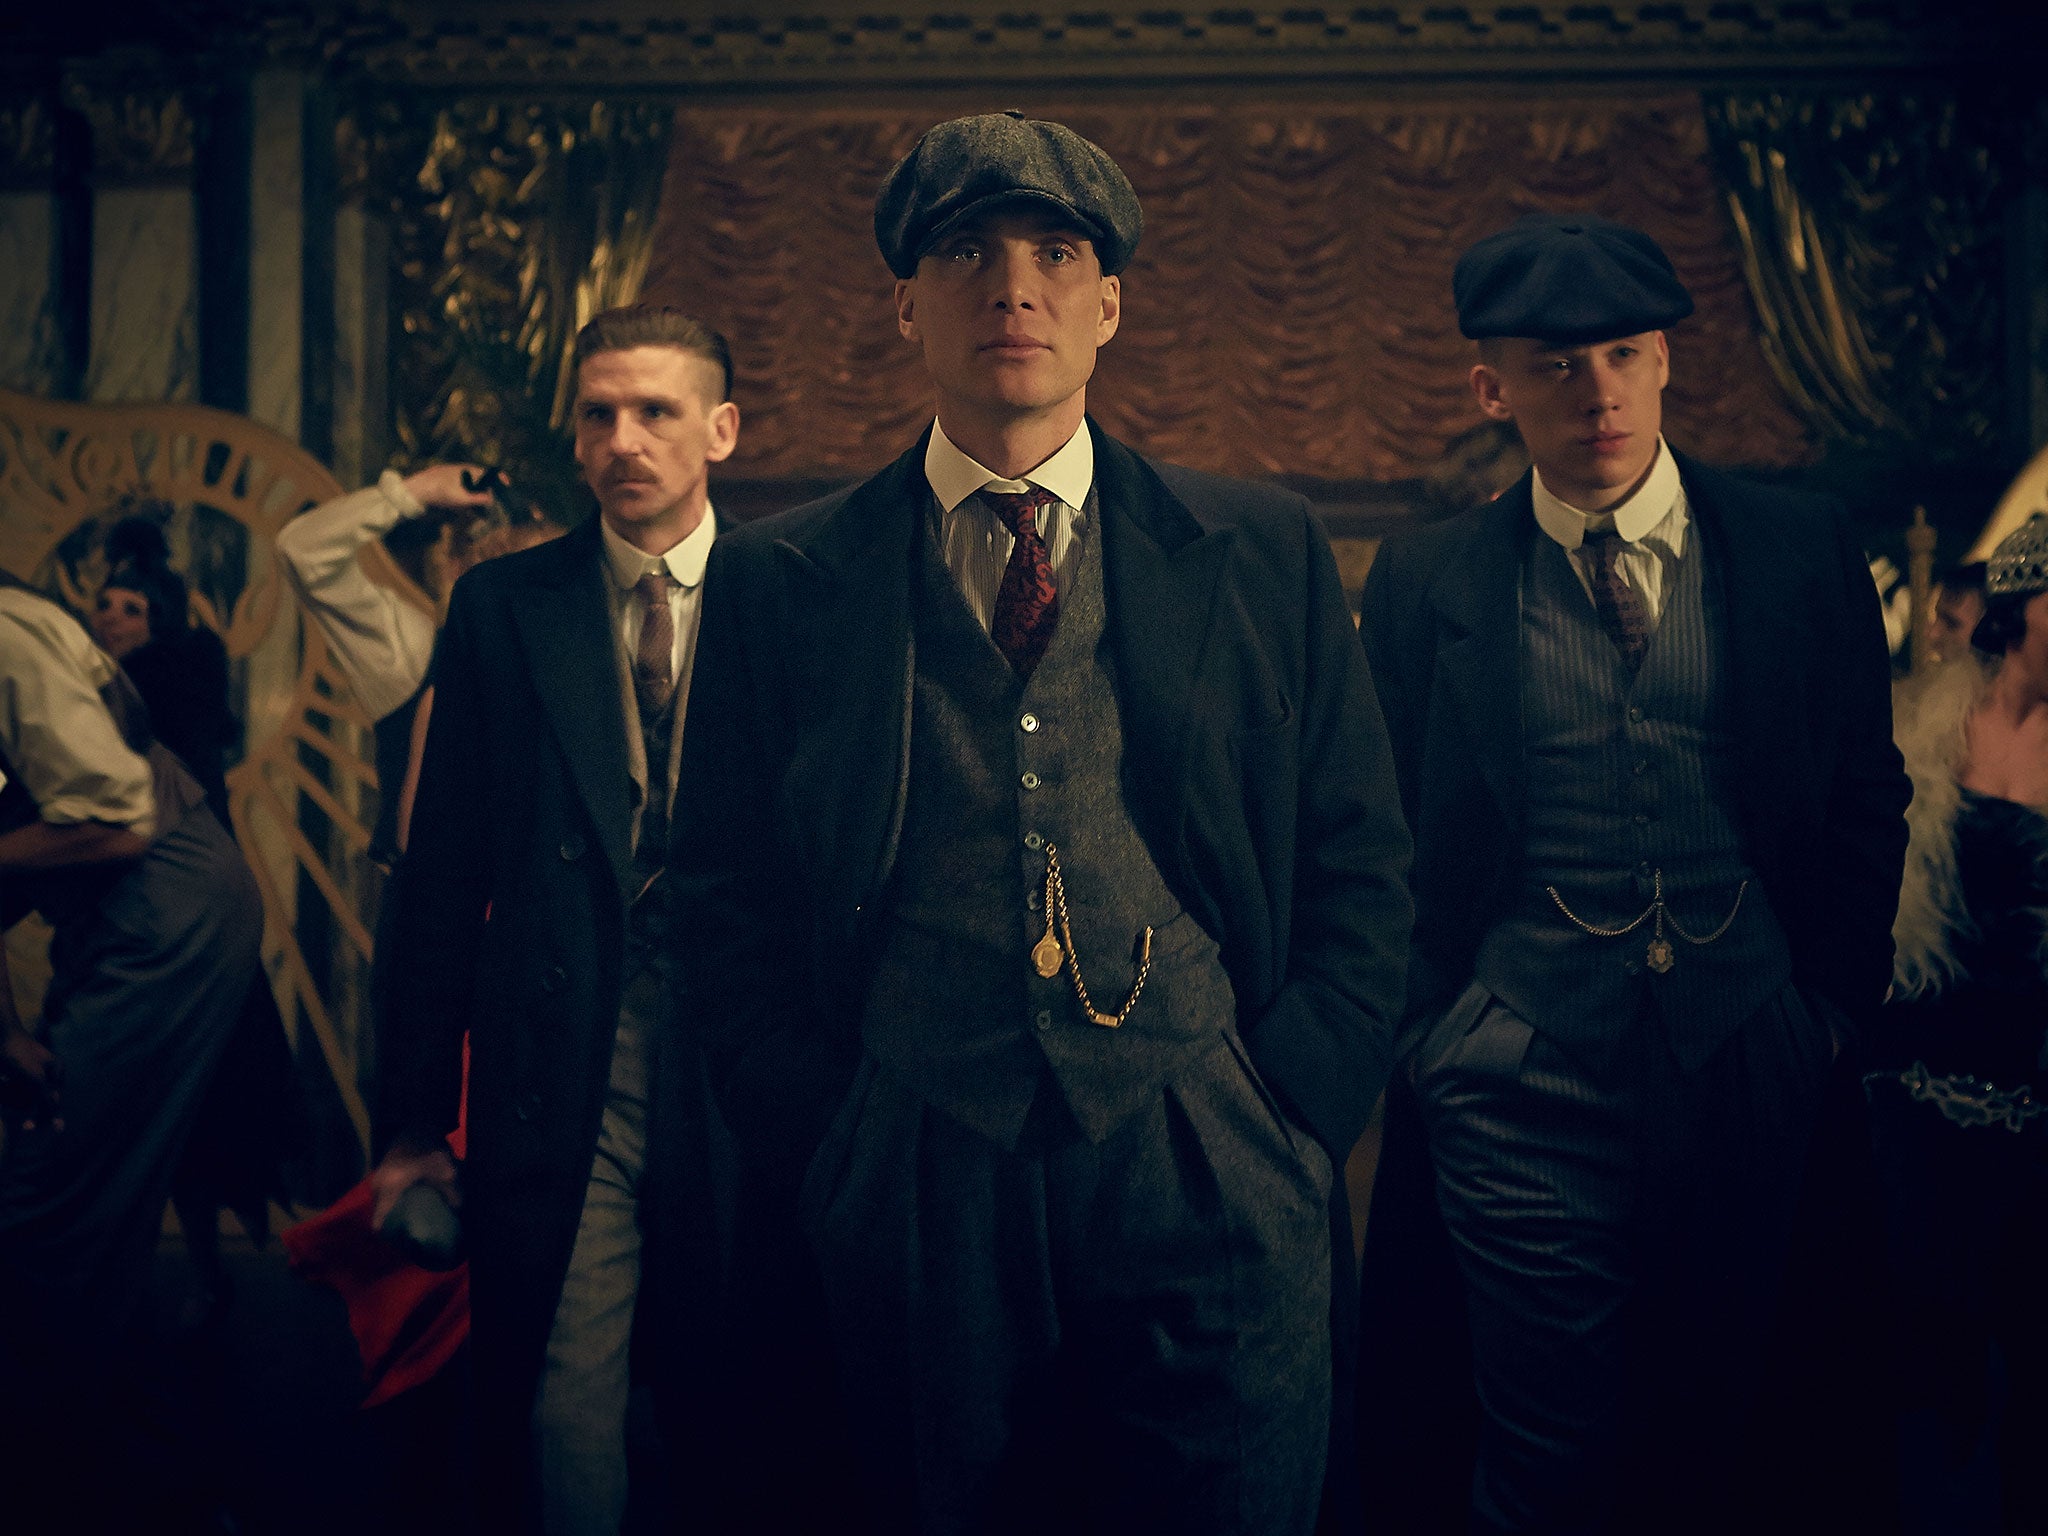 Paul Anderson, Cillian Murphy and Joe Cole as the Shelby Brothers in Peaky Blinders